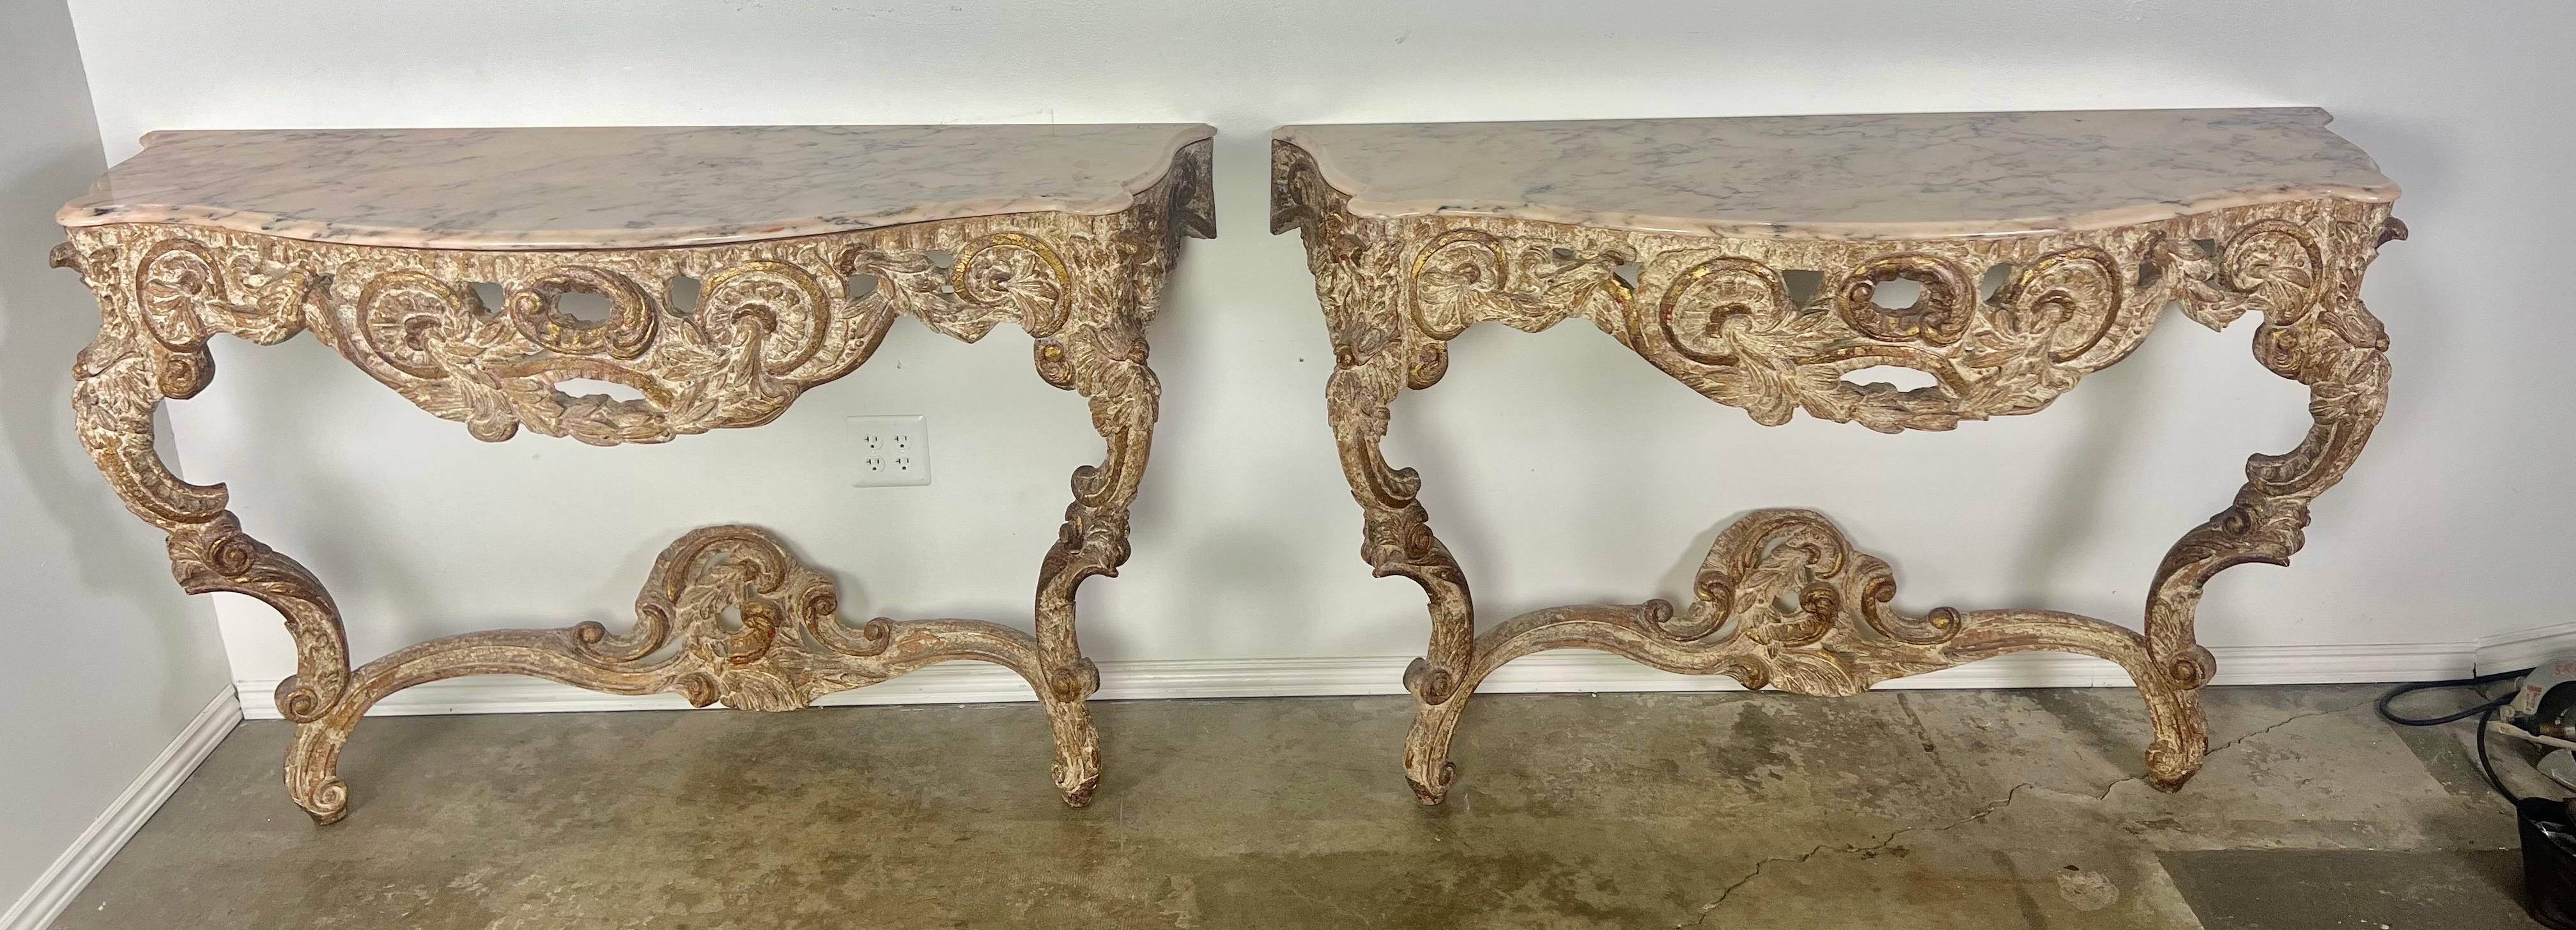 Pair of 1930's giltwood Italian Rococo style consoles with marble tops.  The ornately carved wood consoles stand on cabriole legs.  Laurel leaves, acanthus leaves and scrolls can be seen in the intricate carving.  The consoles are topped with the